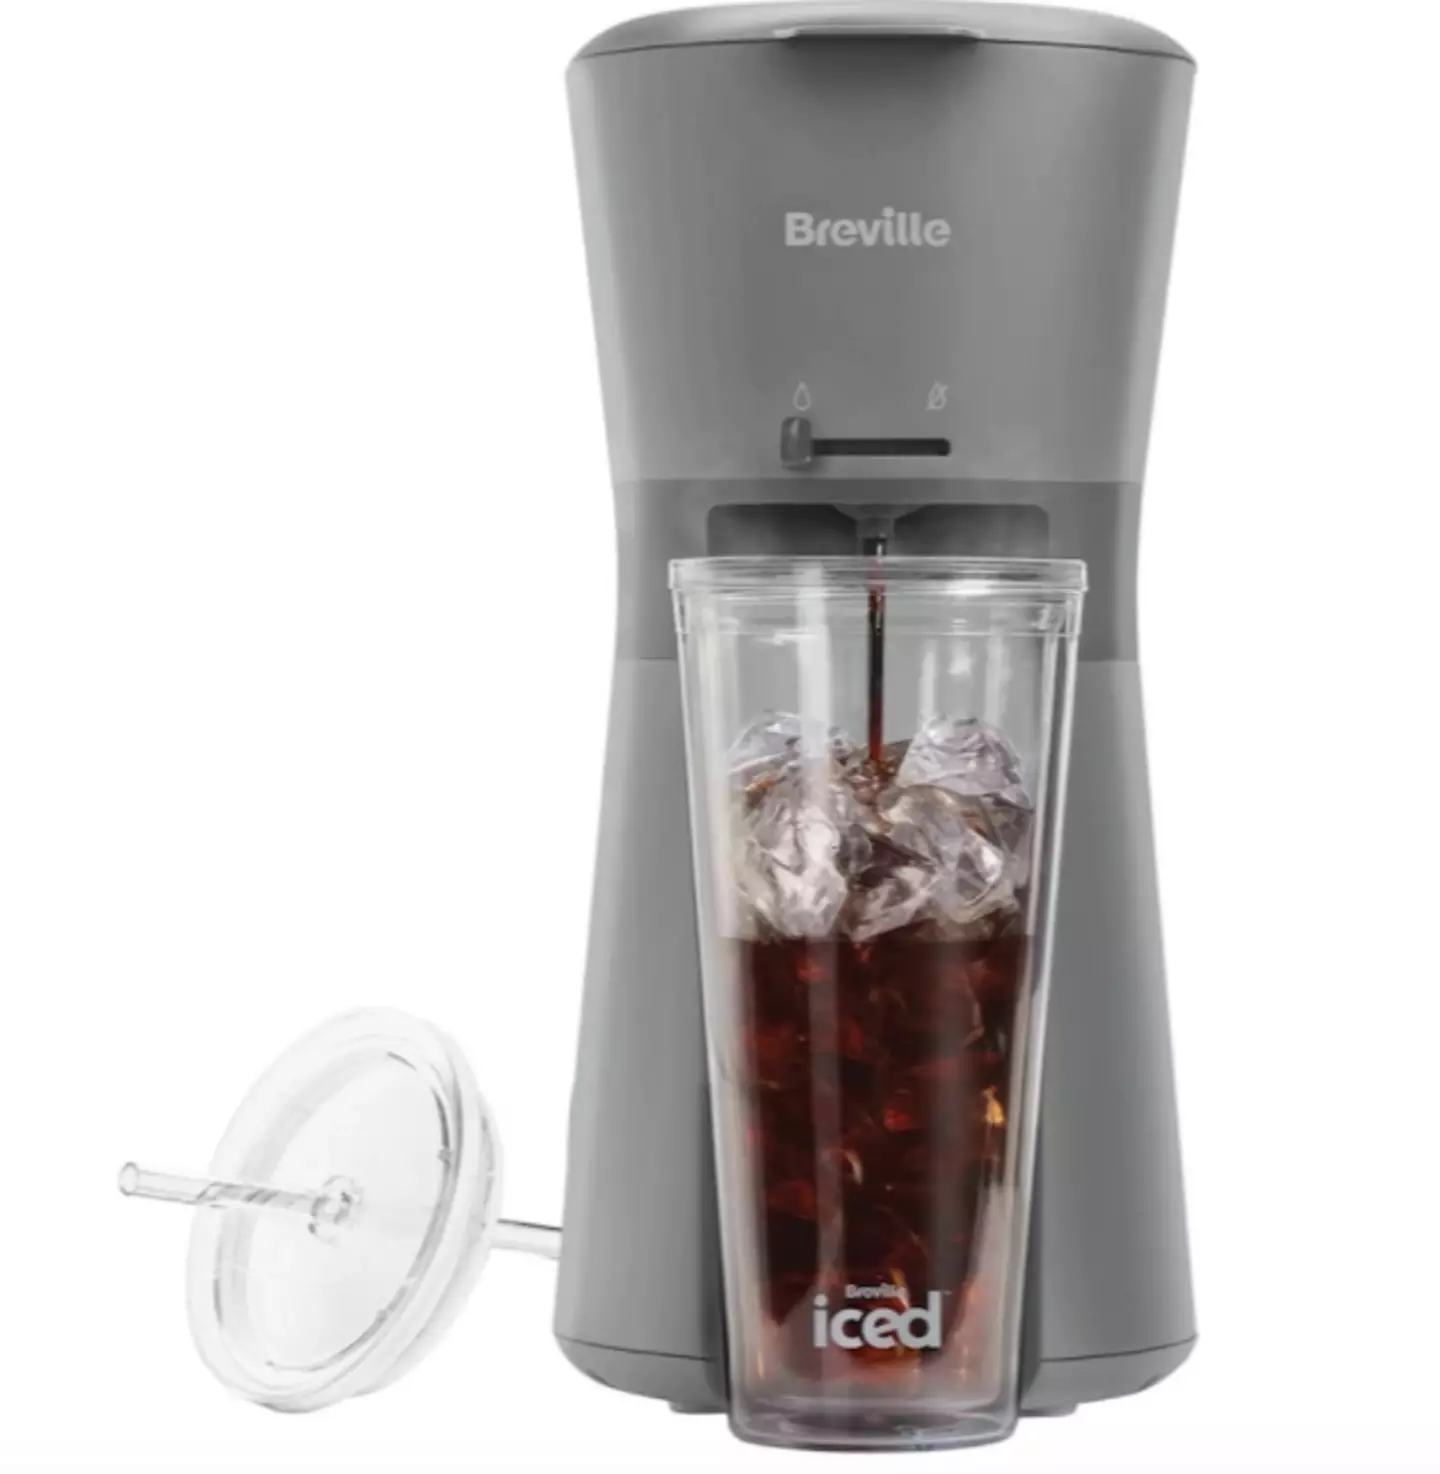 You can now make your own iced coffee from home (